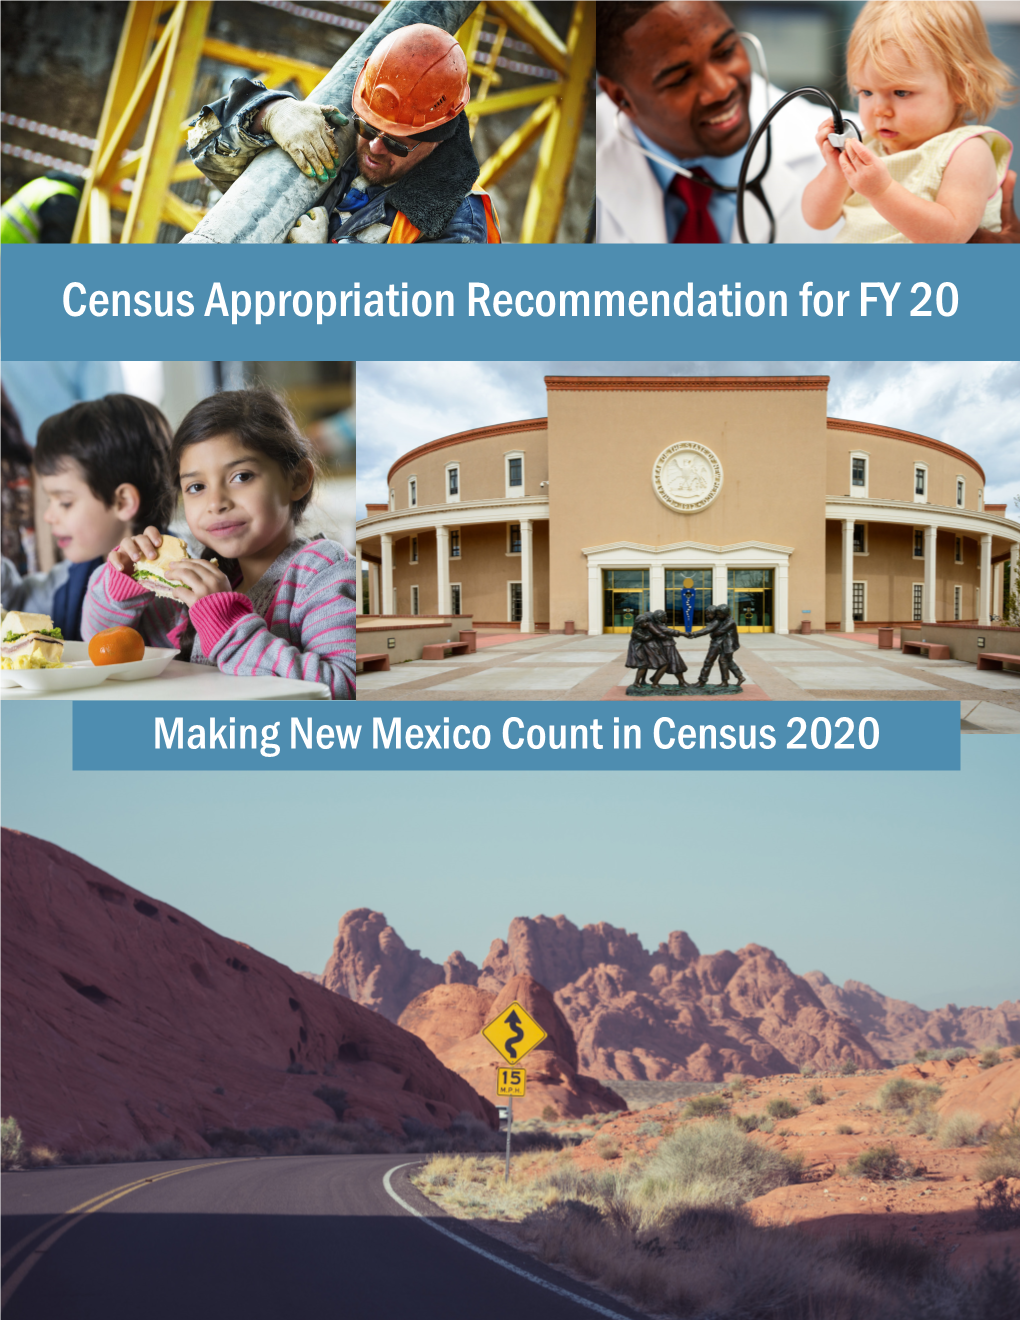 Census Appropriation Recommendation for FY 20